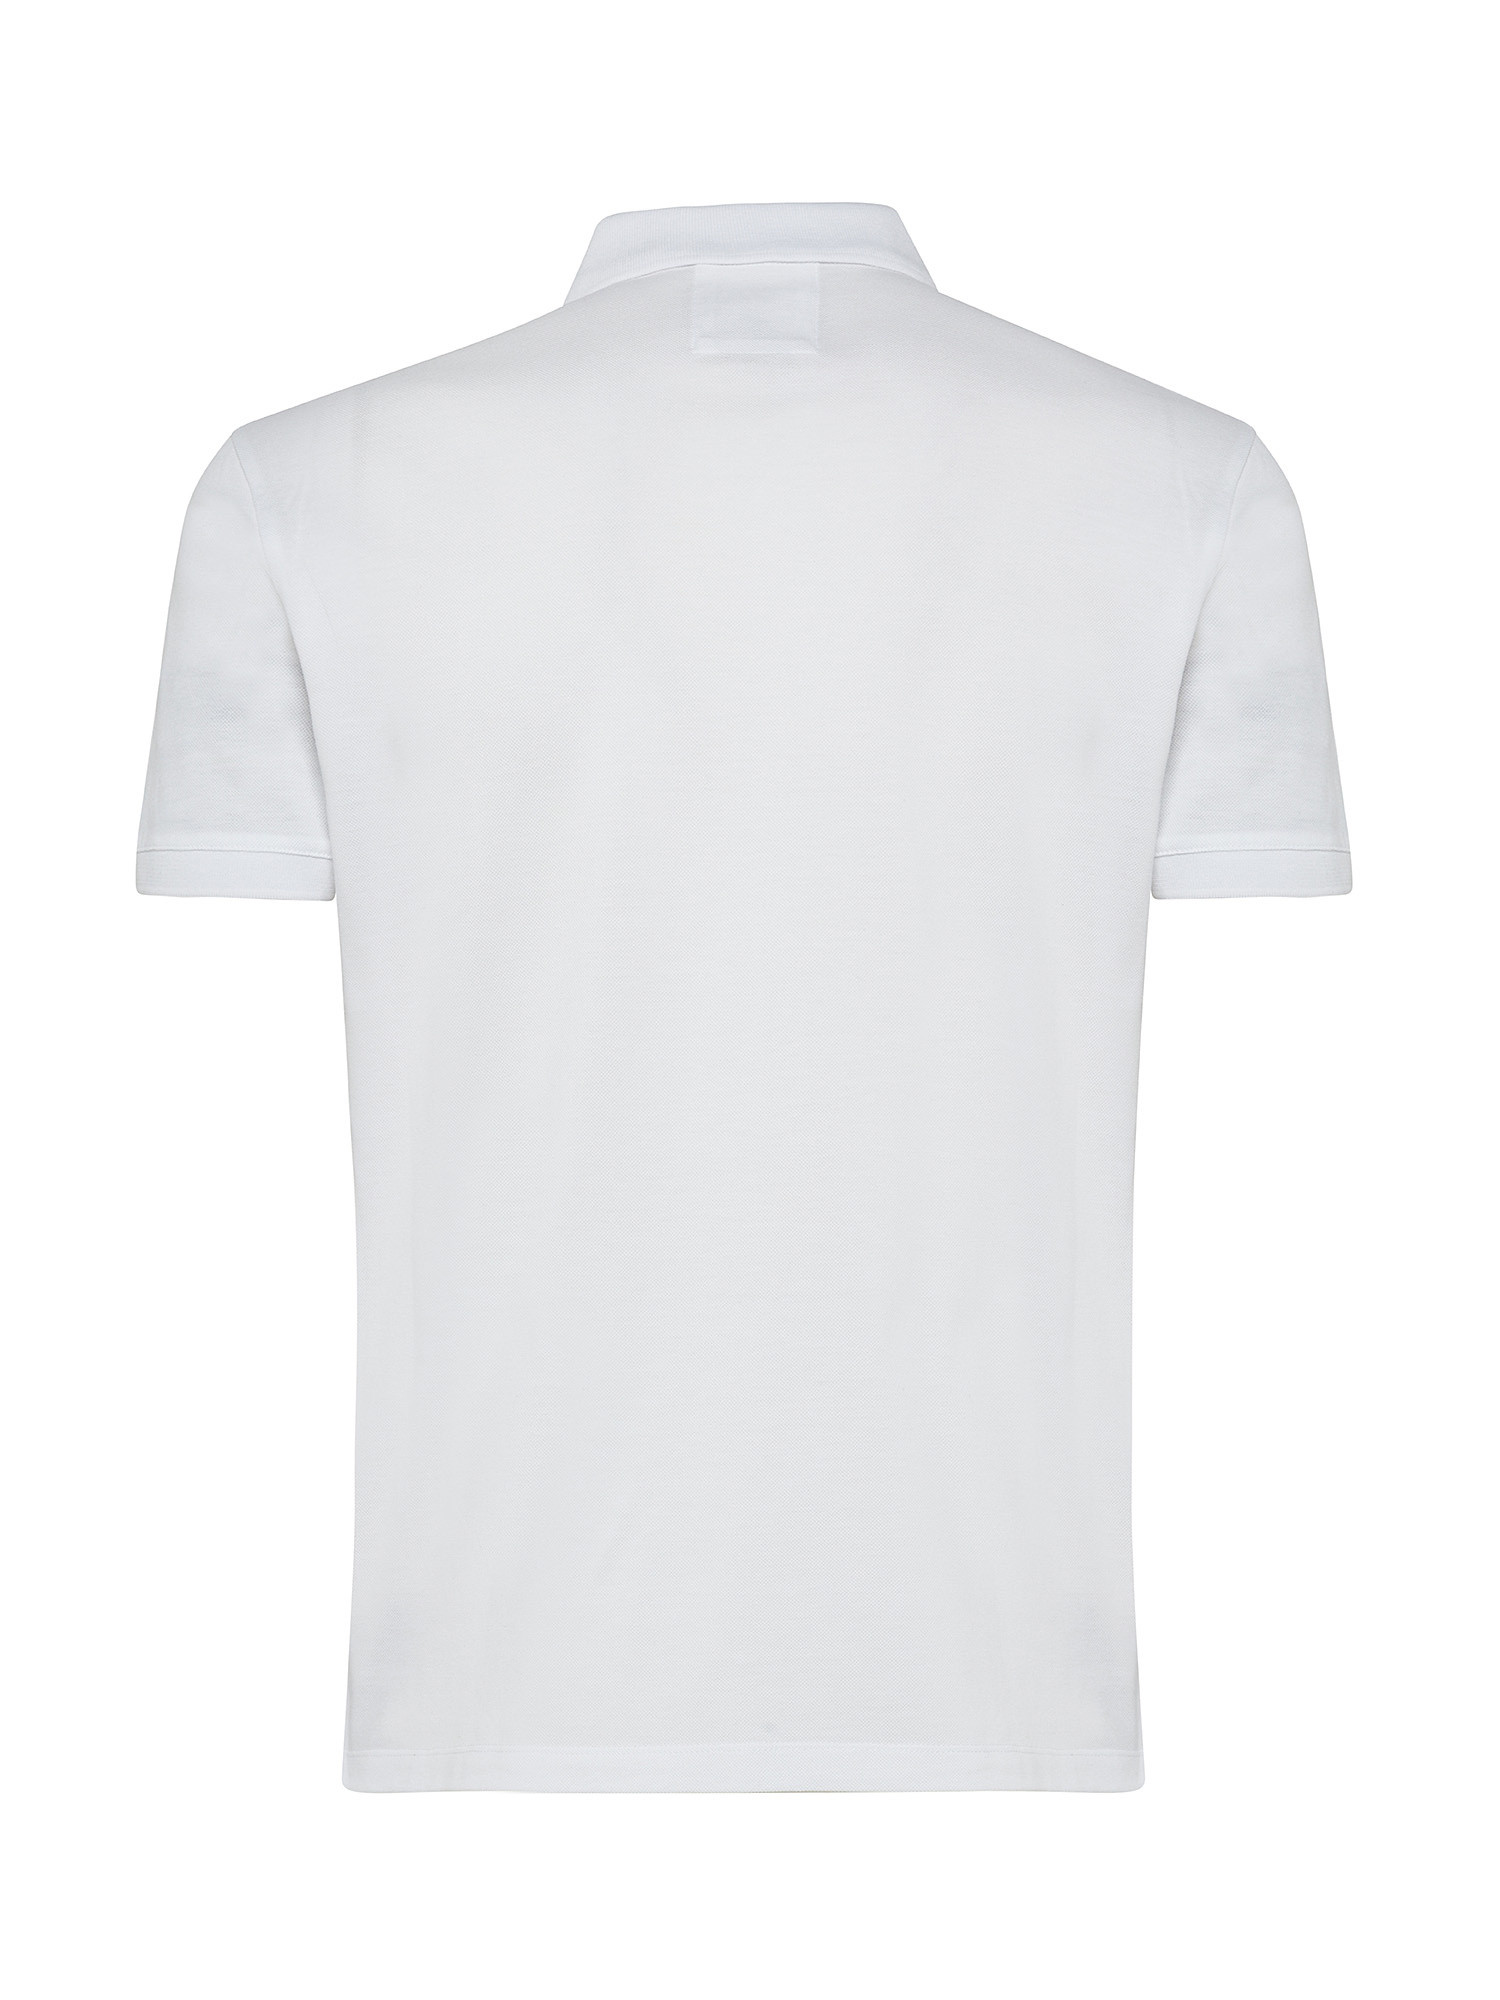 Emporio Armani - Cotton polo shirt with eagle logo embroidery, White, large image number 1